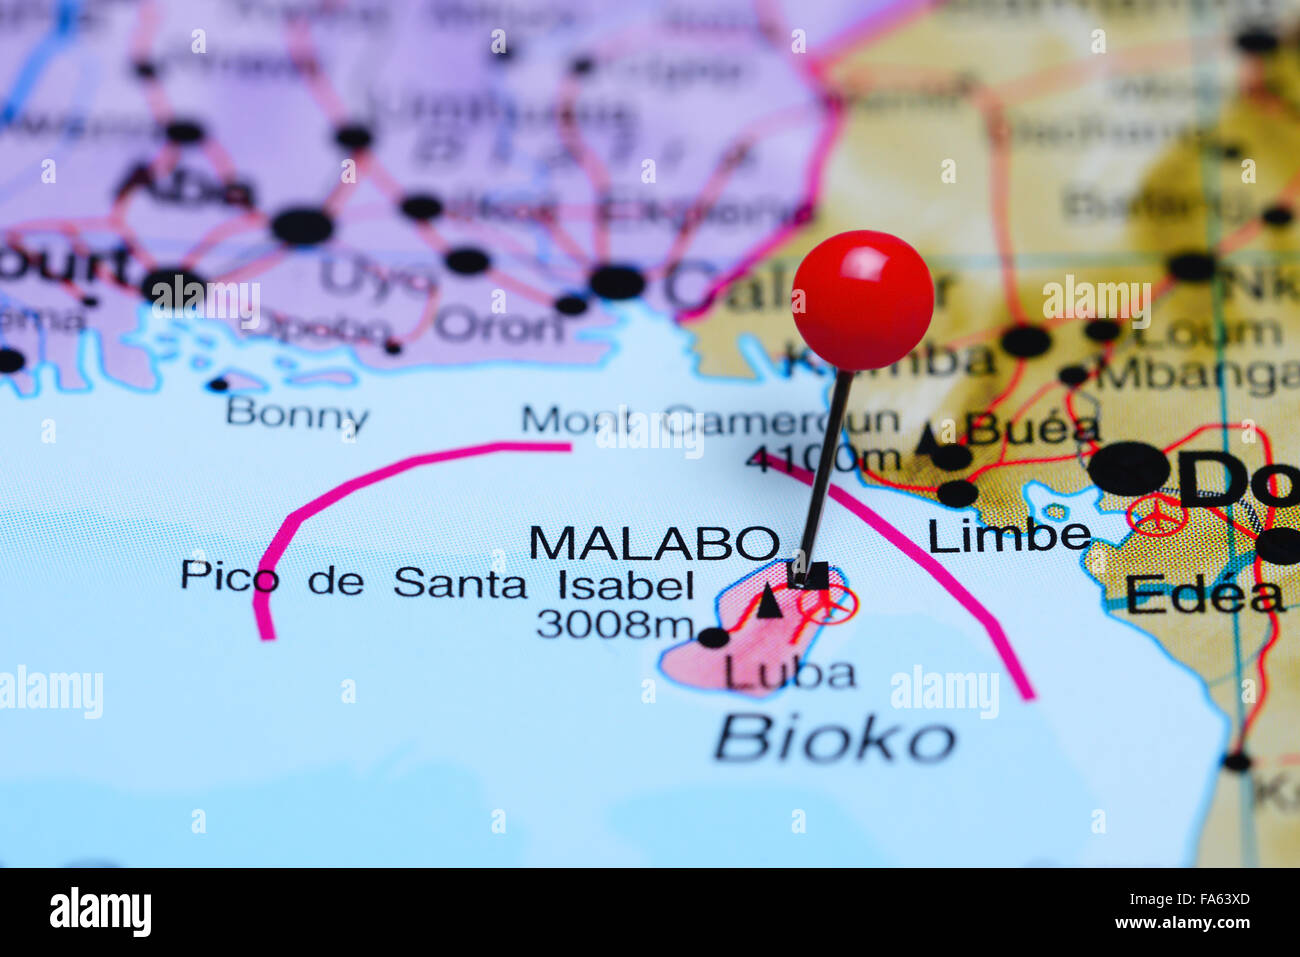 Malabo pinned on a map of Africa Stock Photo